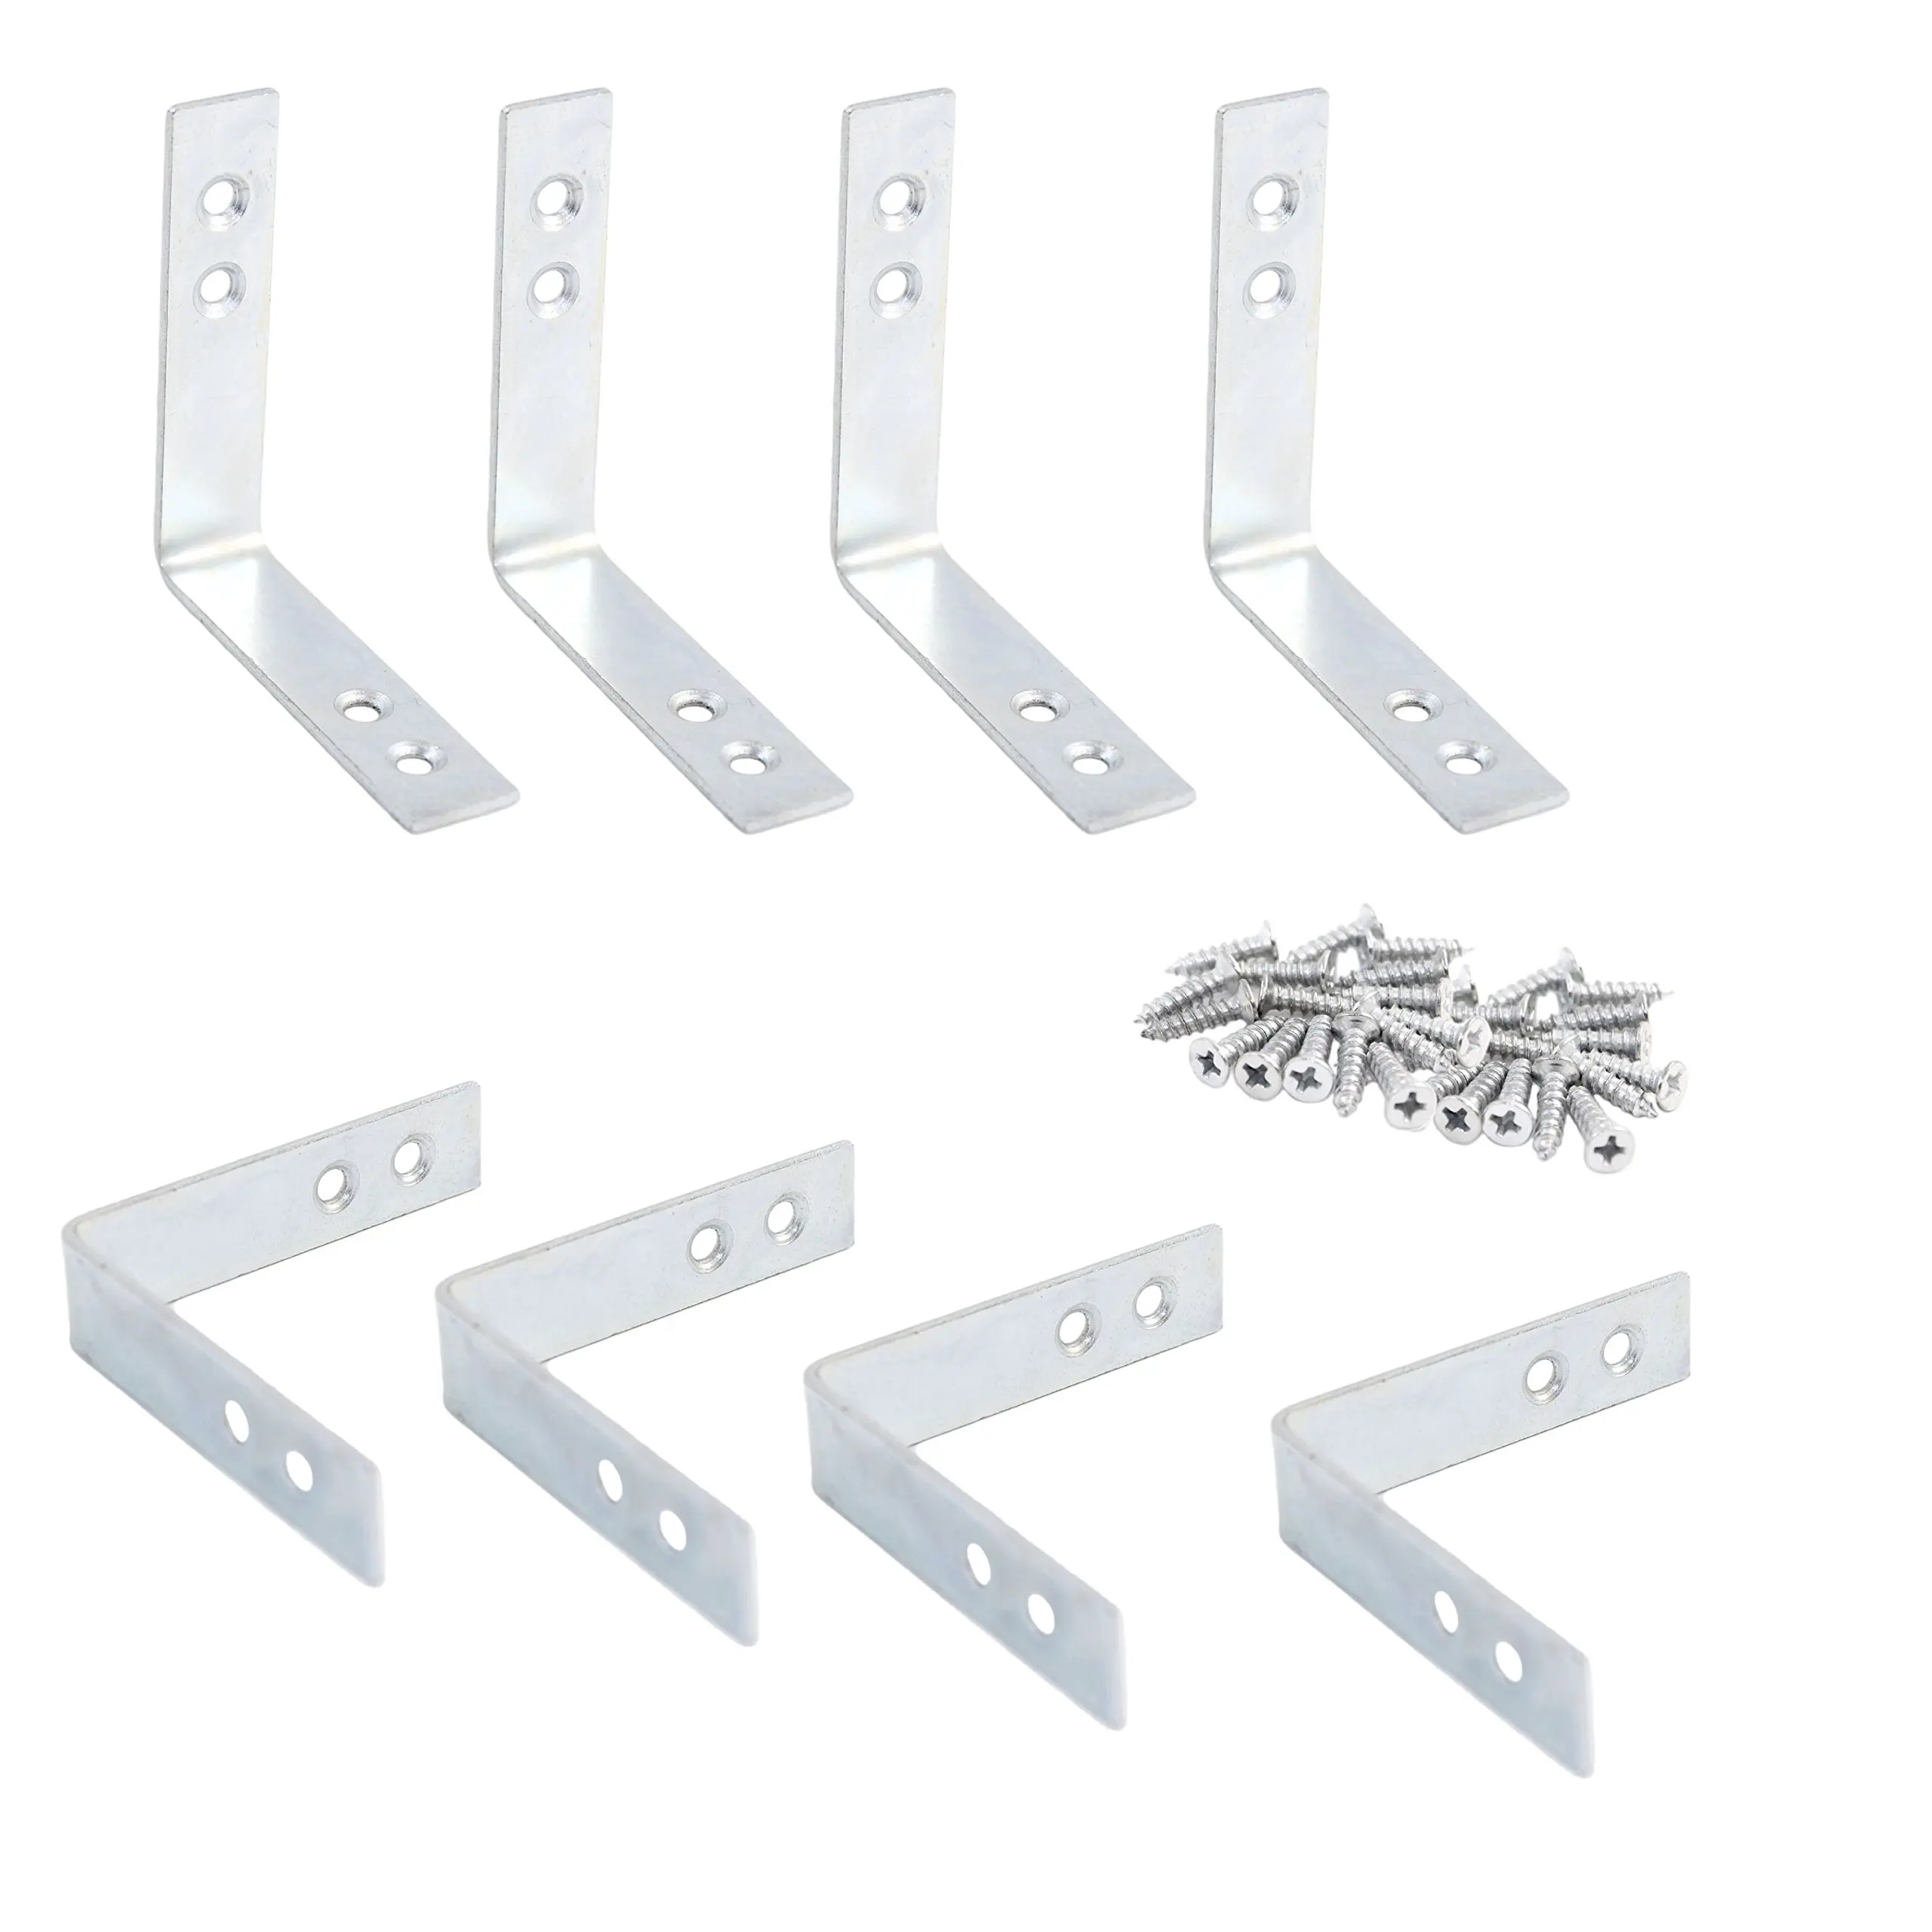 Buy Pack of 8 Corner Brackets with Screws Included in Cheap Price on ...